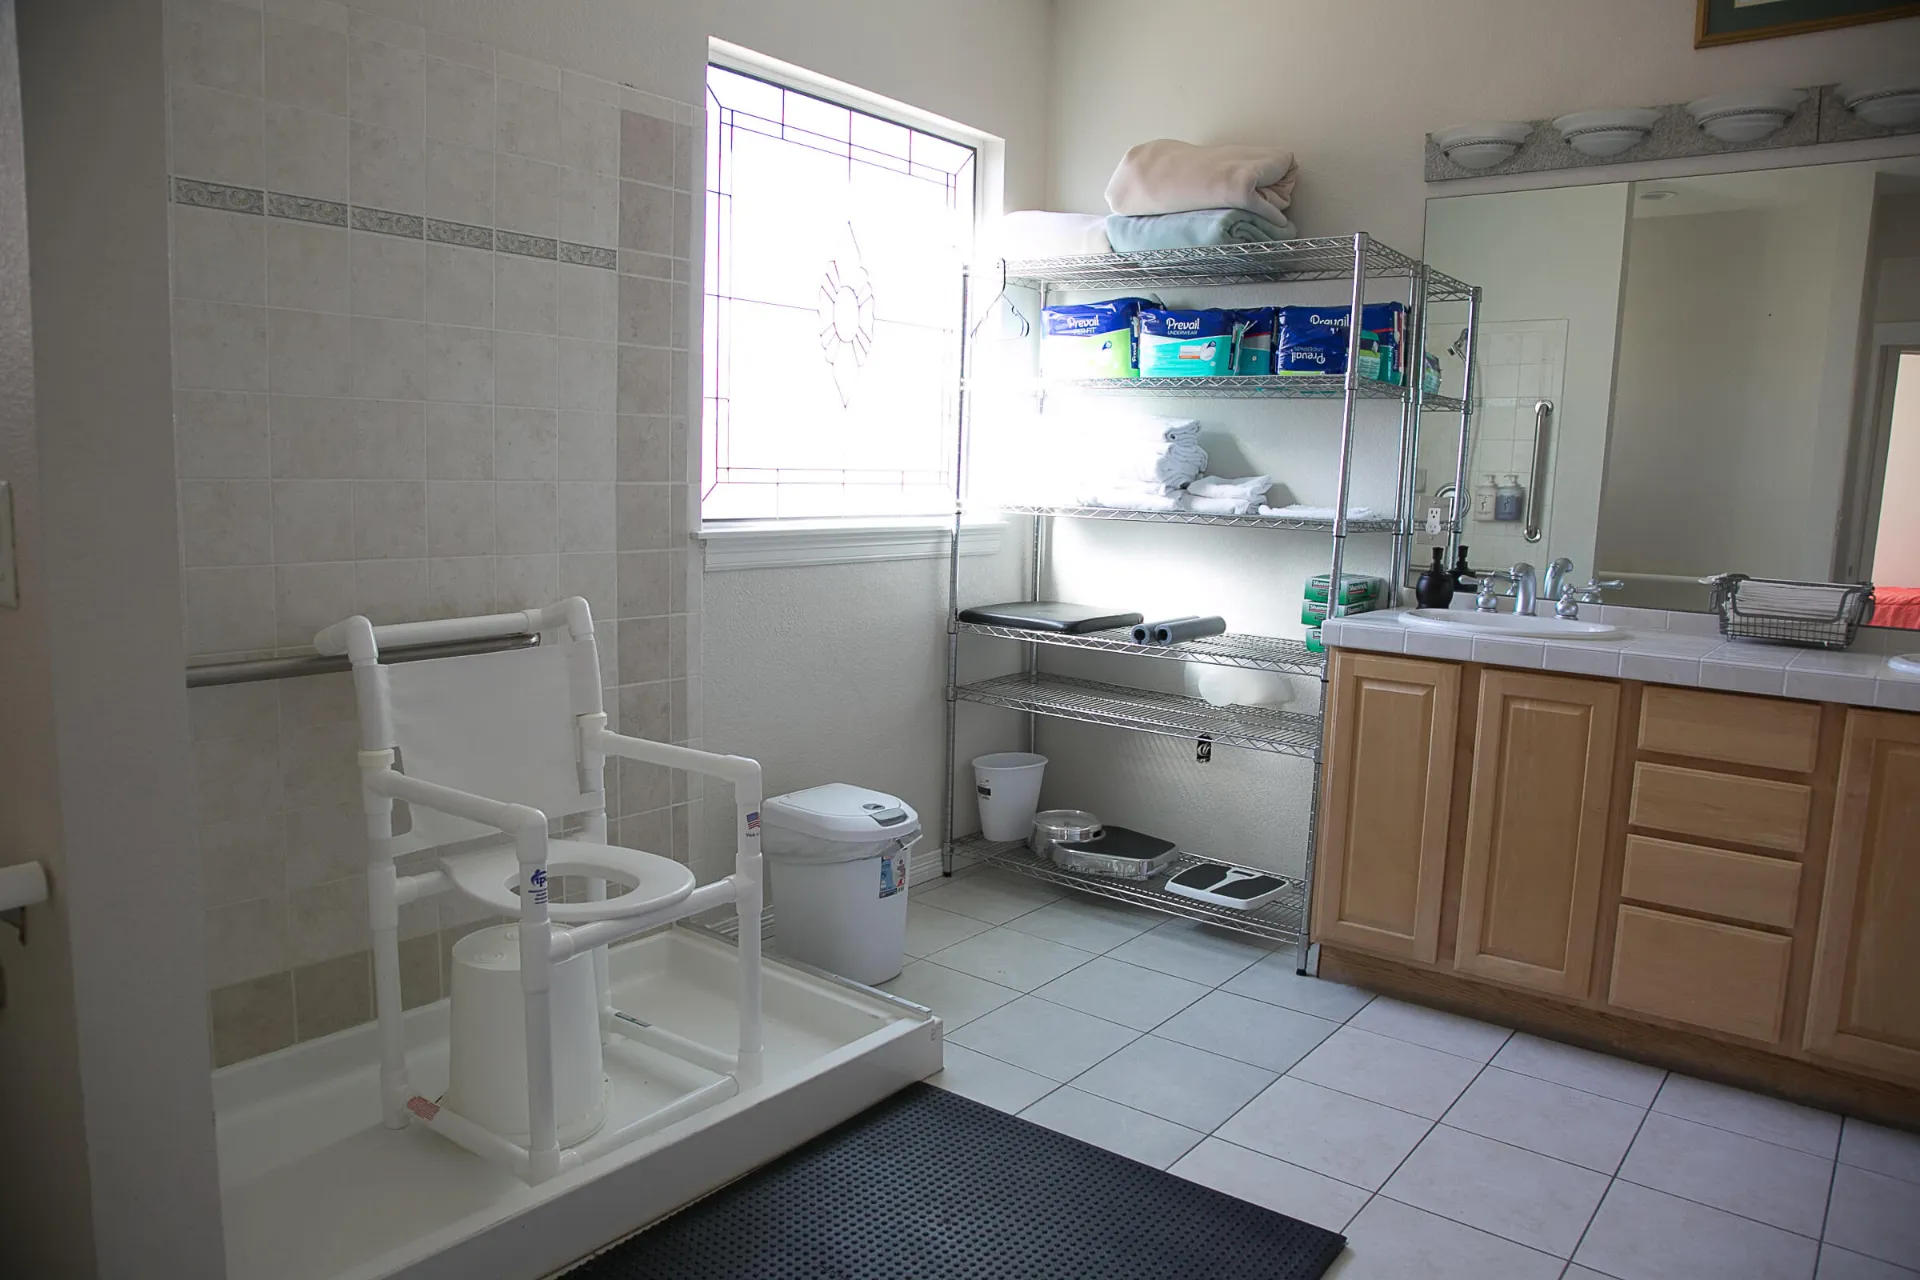 Our second bathroom with assistive equipment.